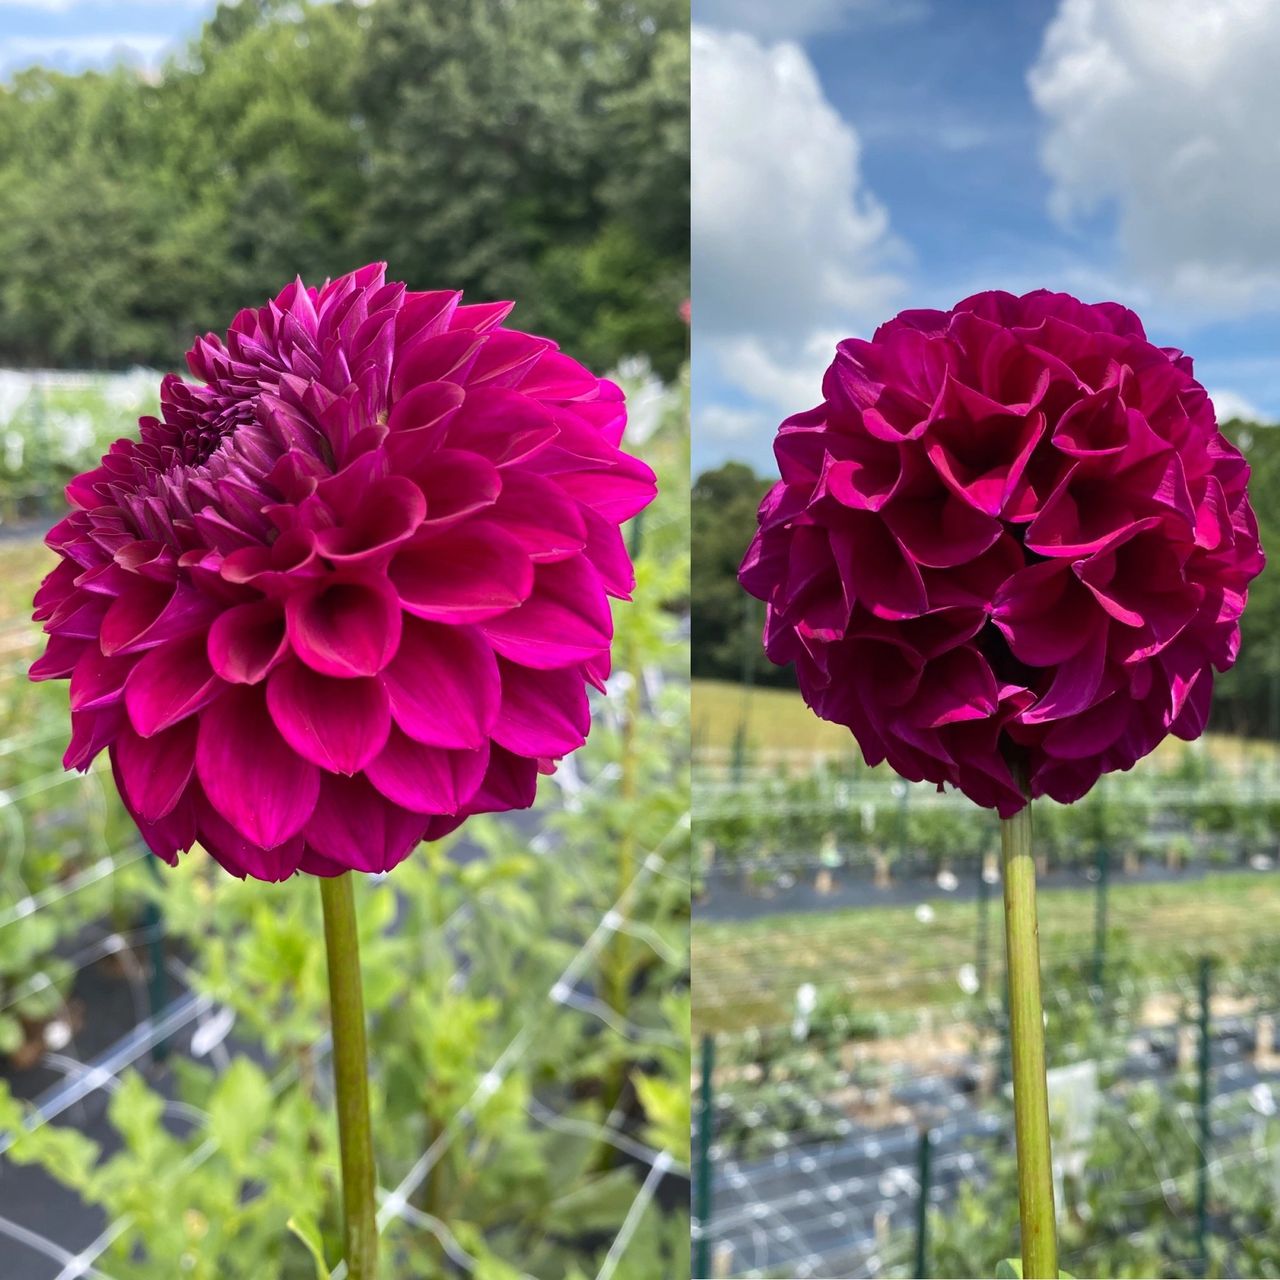 Growing Dahlias for Cut Flowers.